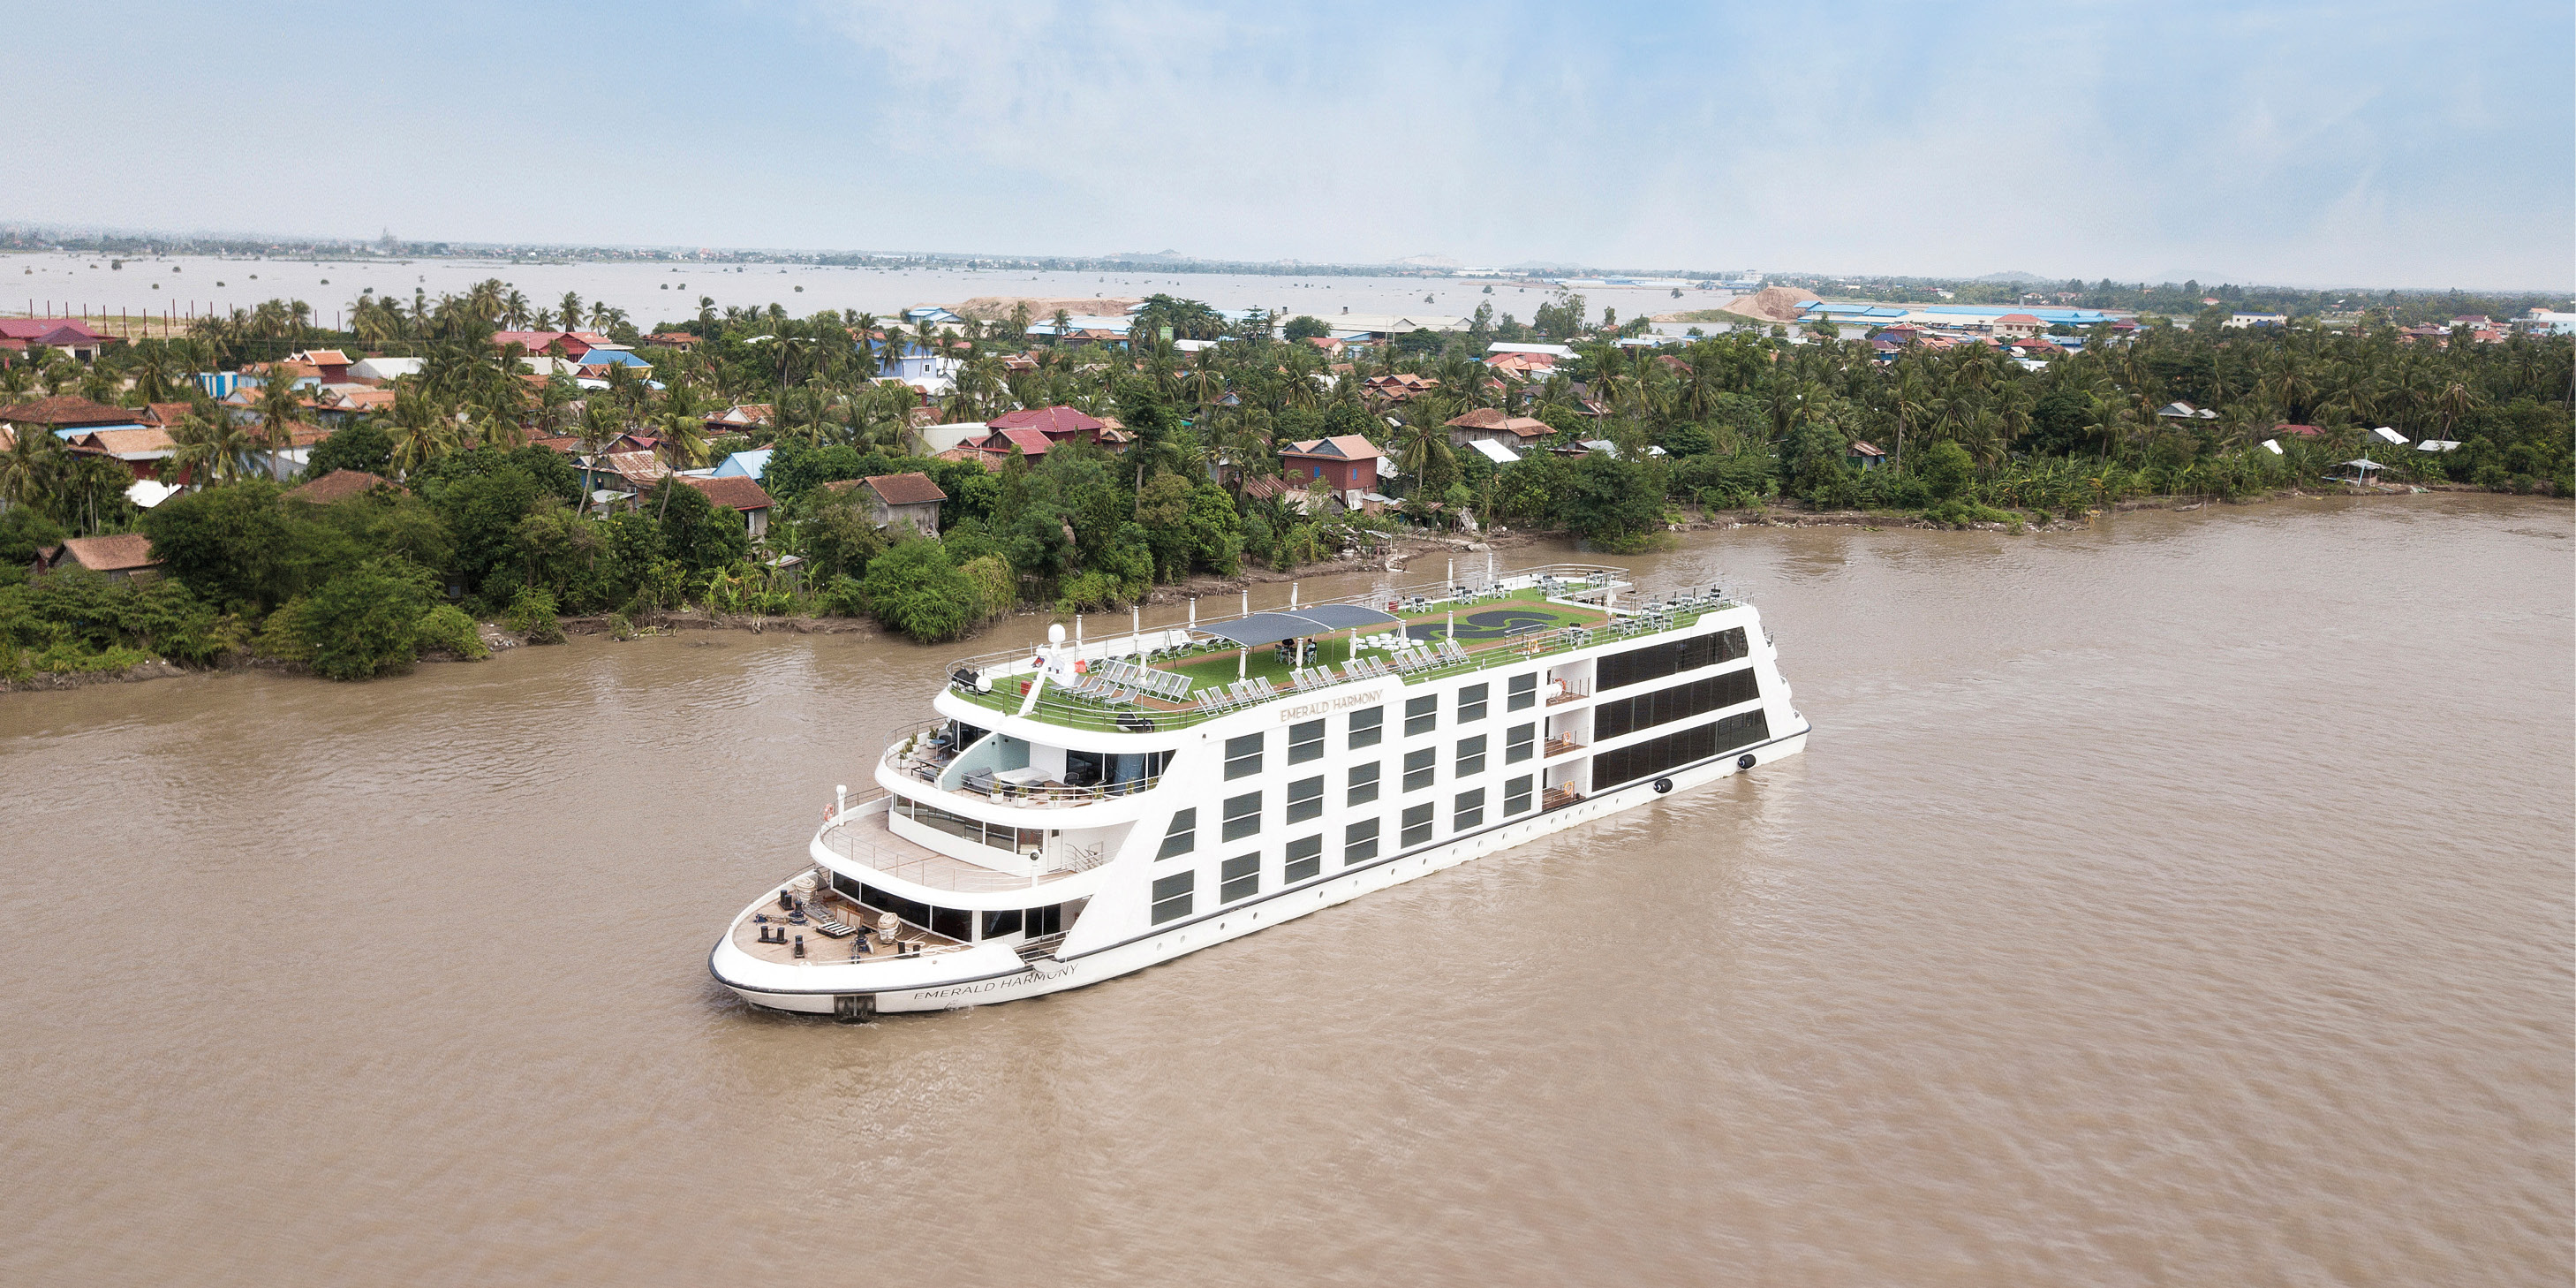 Luxury river ship sailing the Mekong River in Southeast Asia 